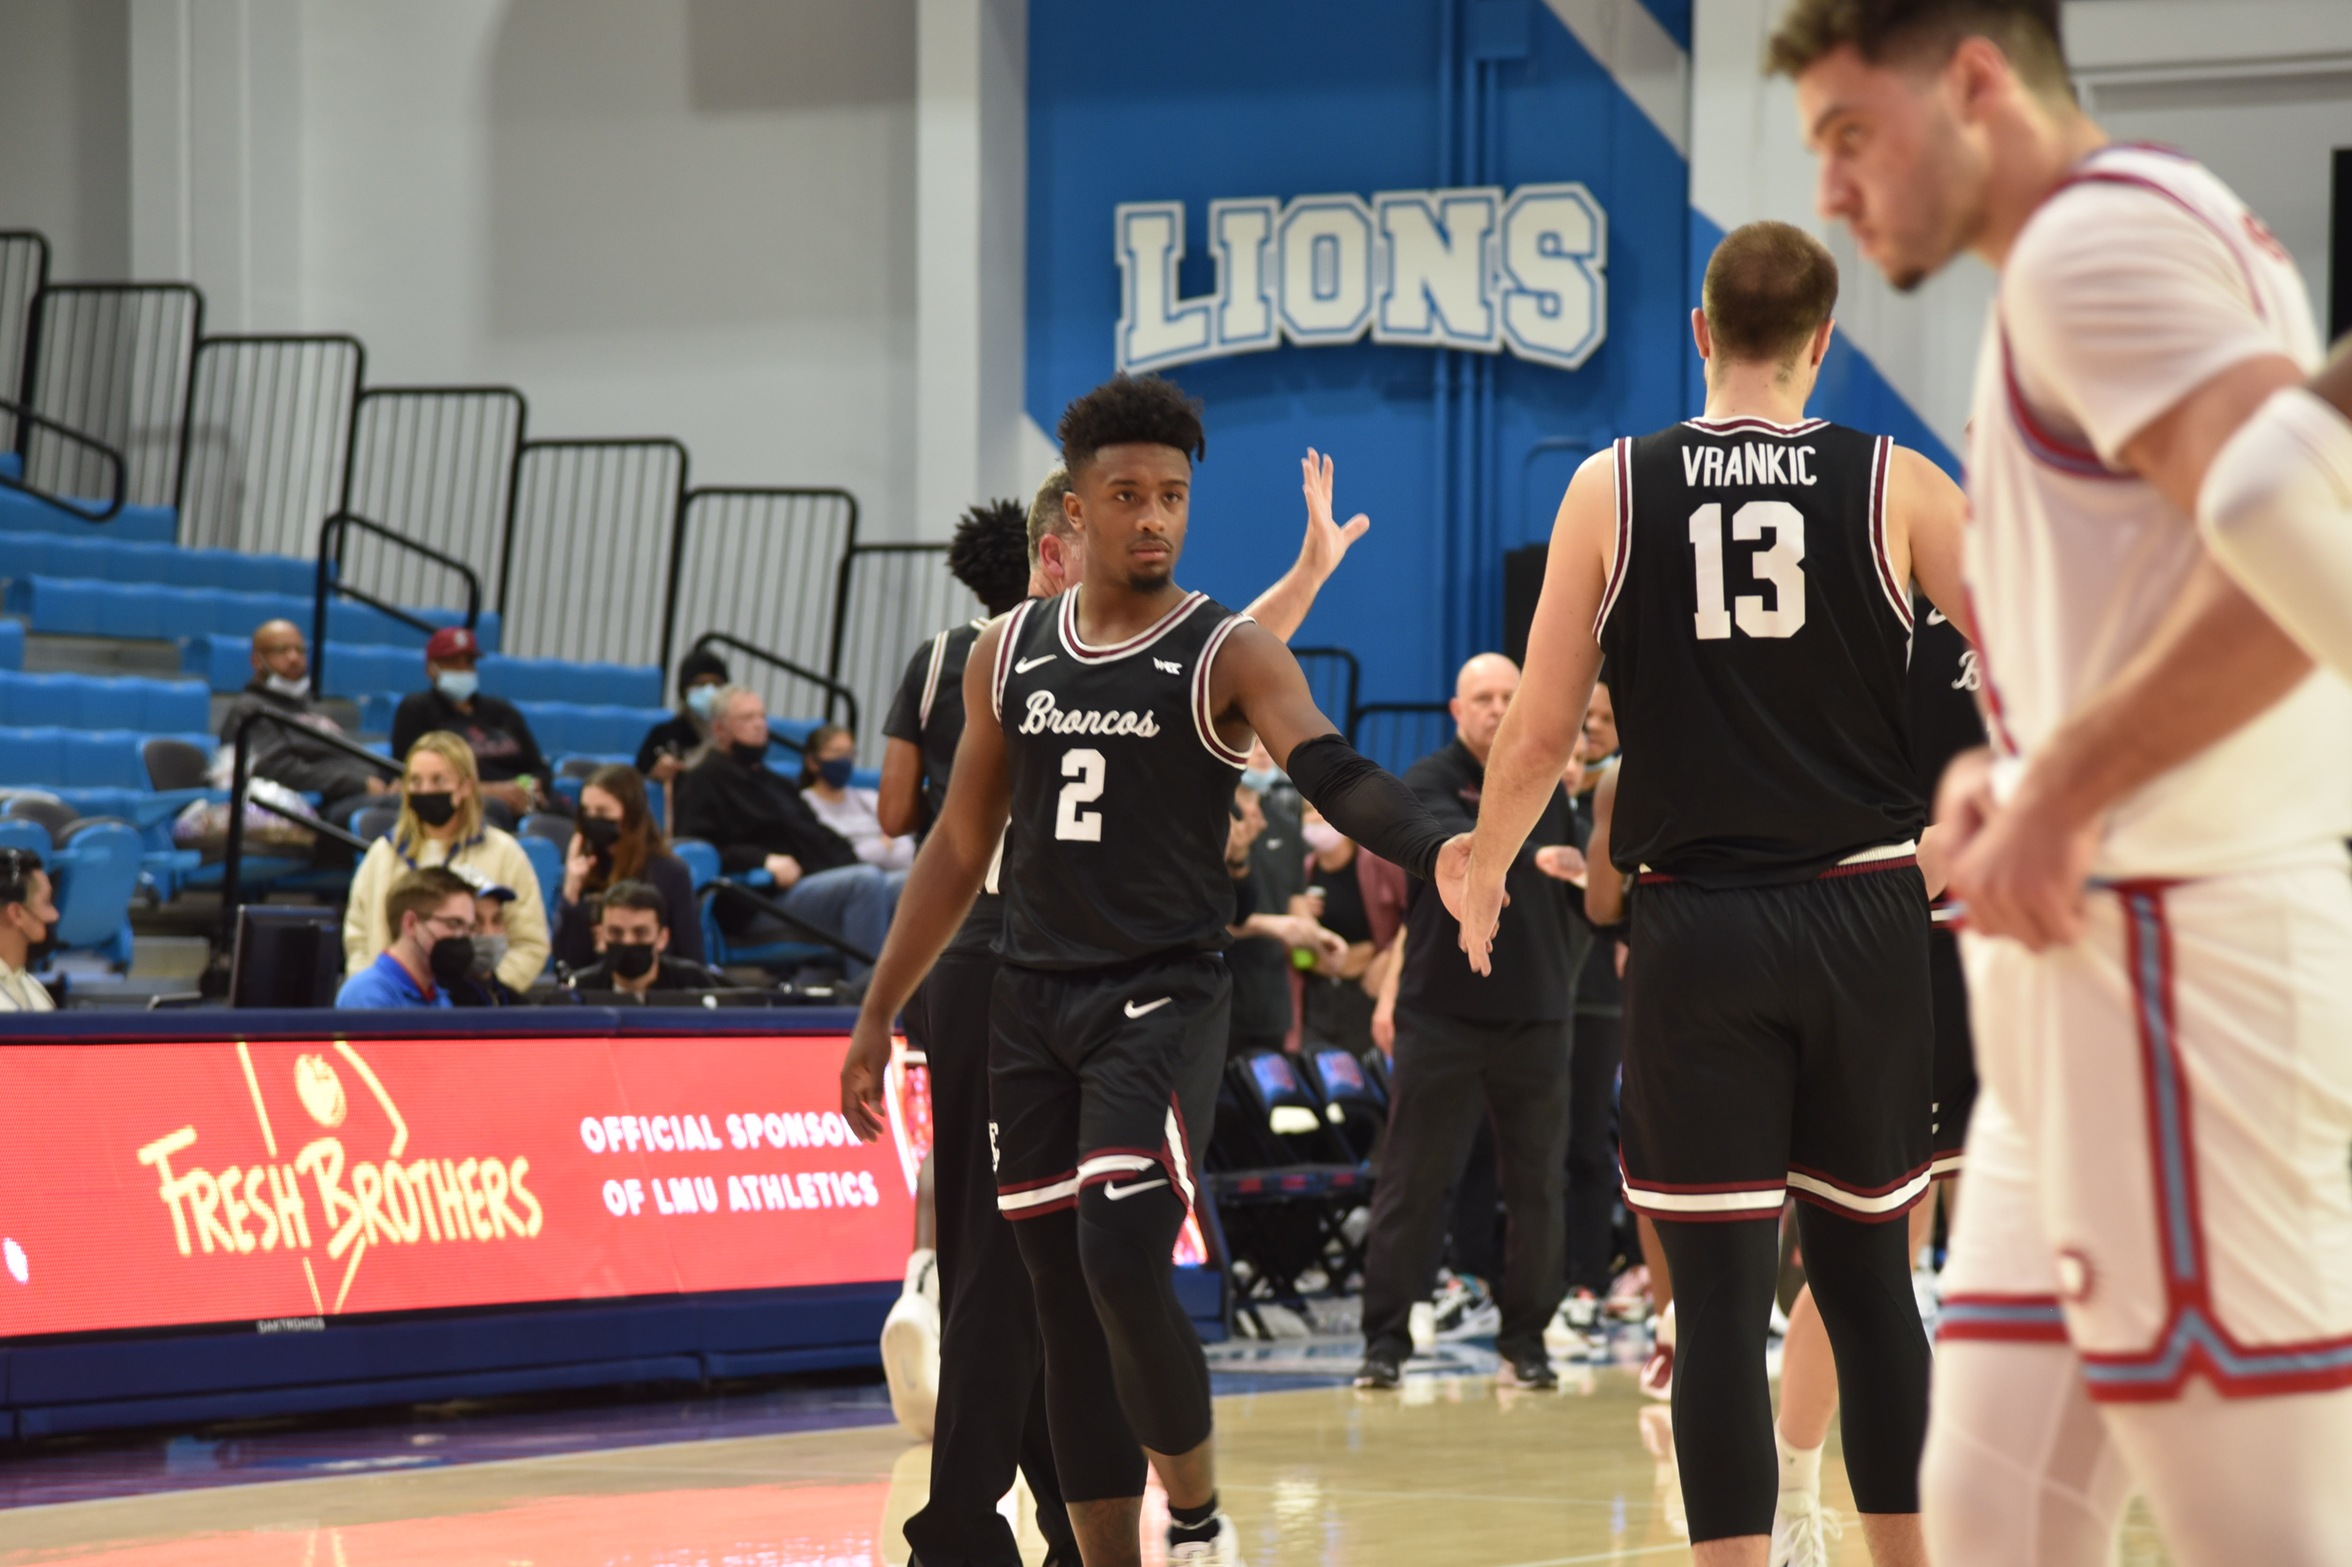 Men's Basketball Holds On At LMU To Win, 84-80